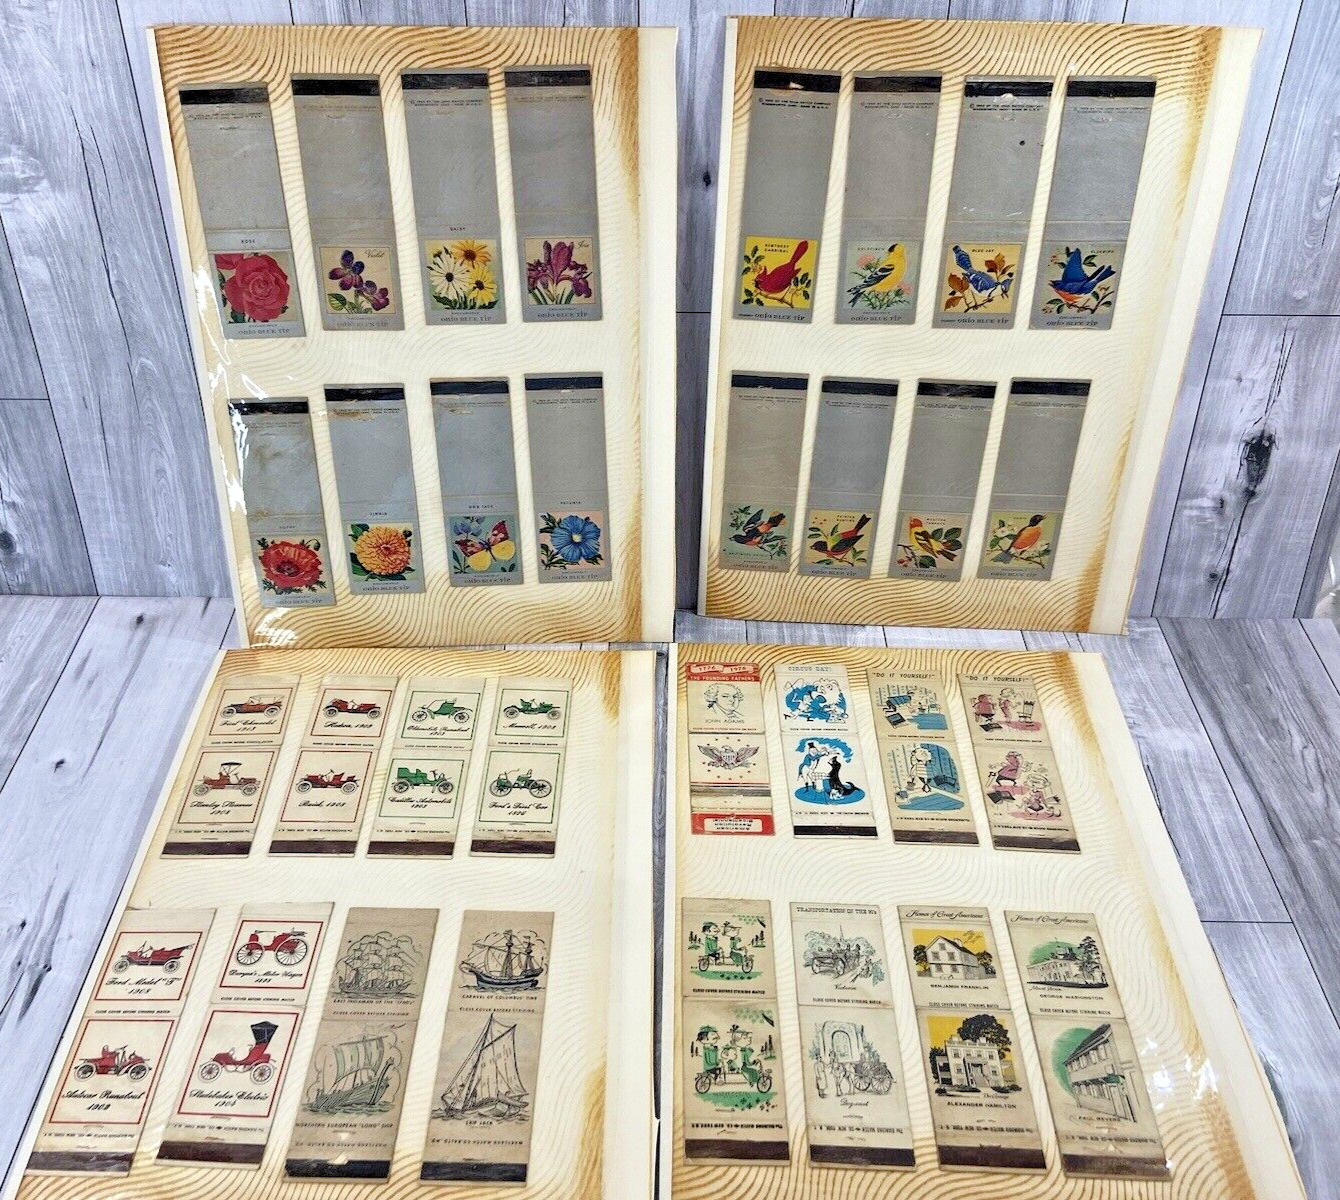 Lot of 64 Vintage Variety Matchbook Covers - Mounted Birds, Fish, Flowers, Etc